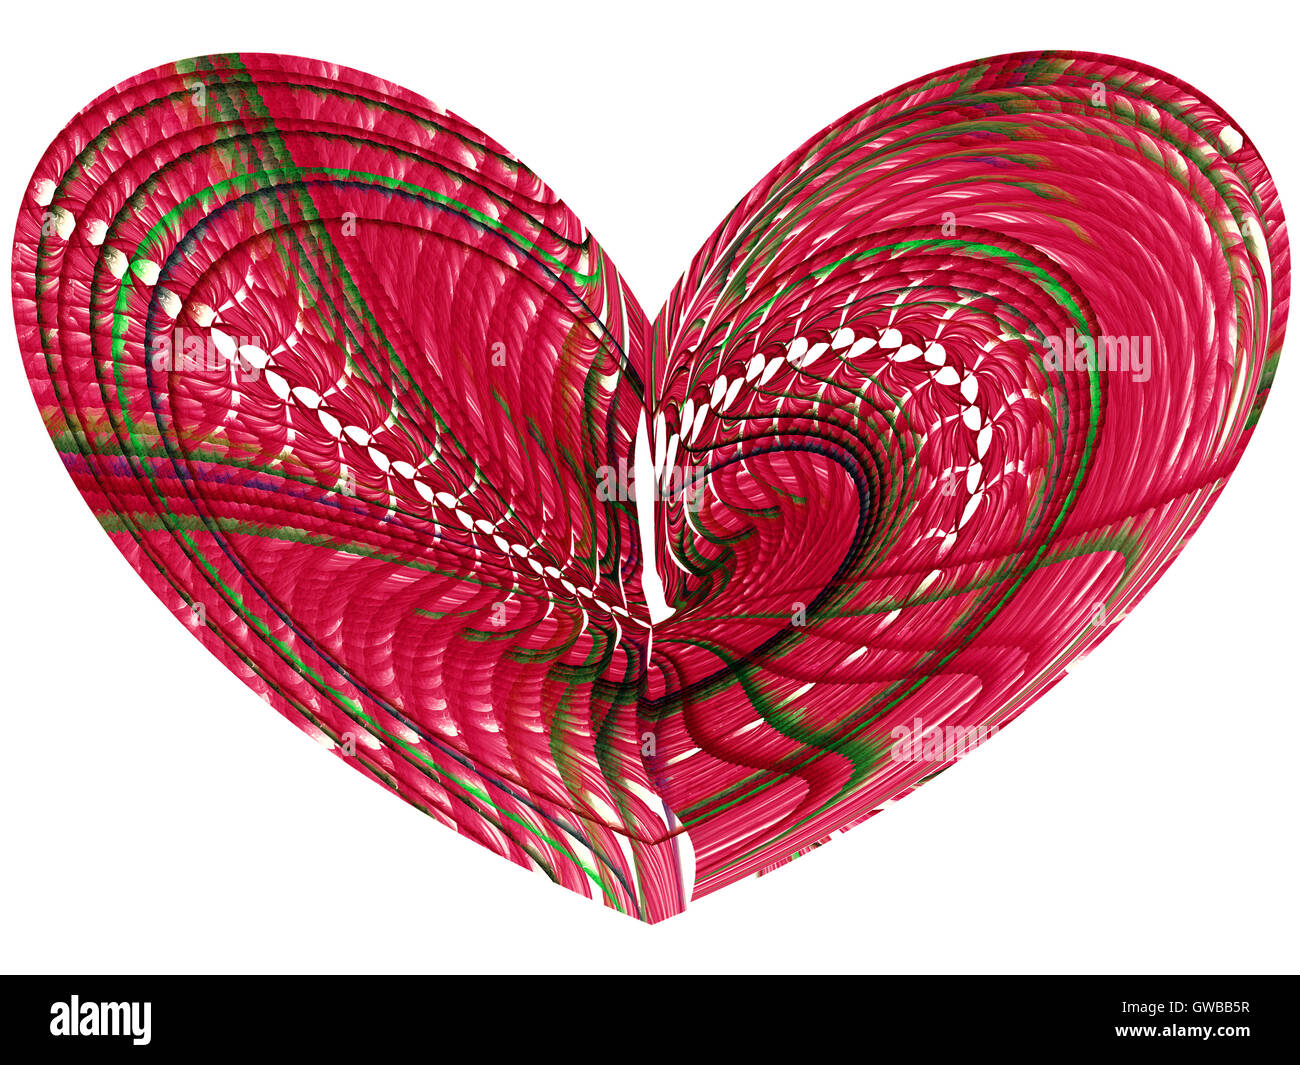 Abstract computer-generated image heart Stock Photo